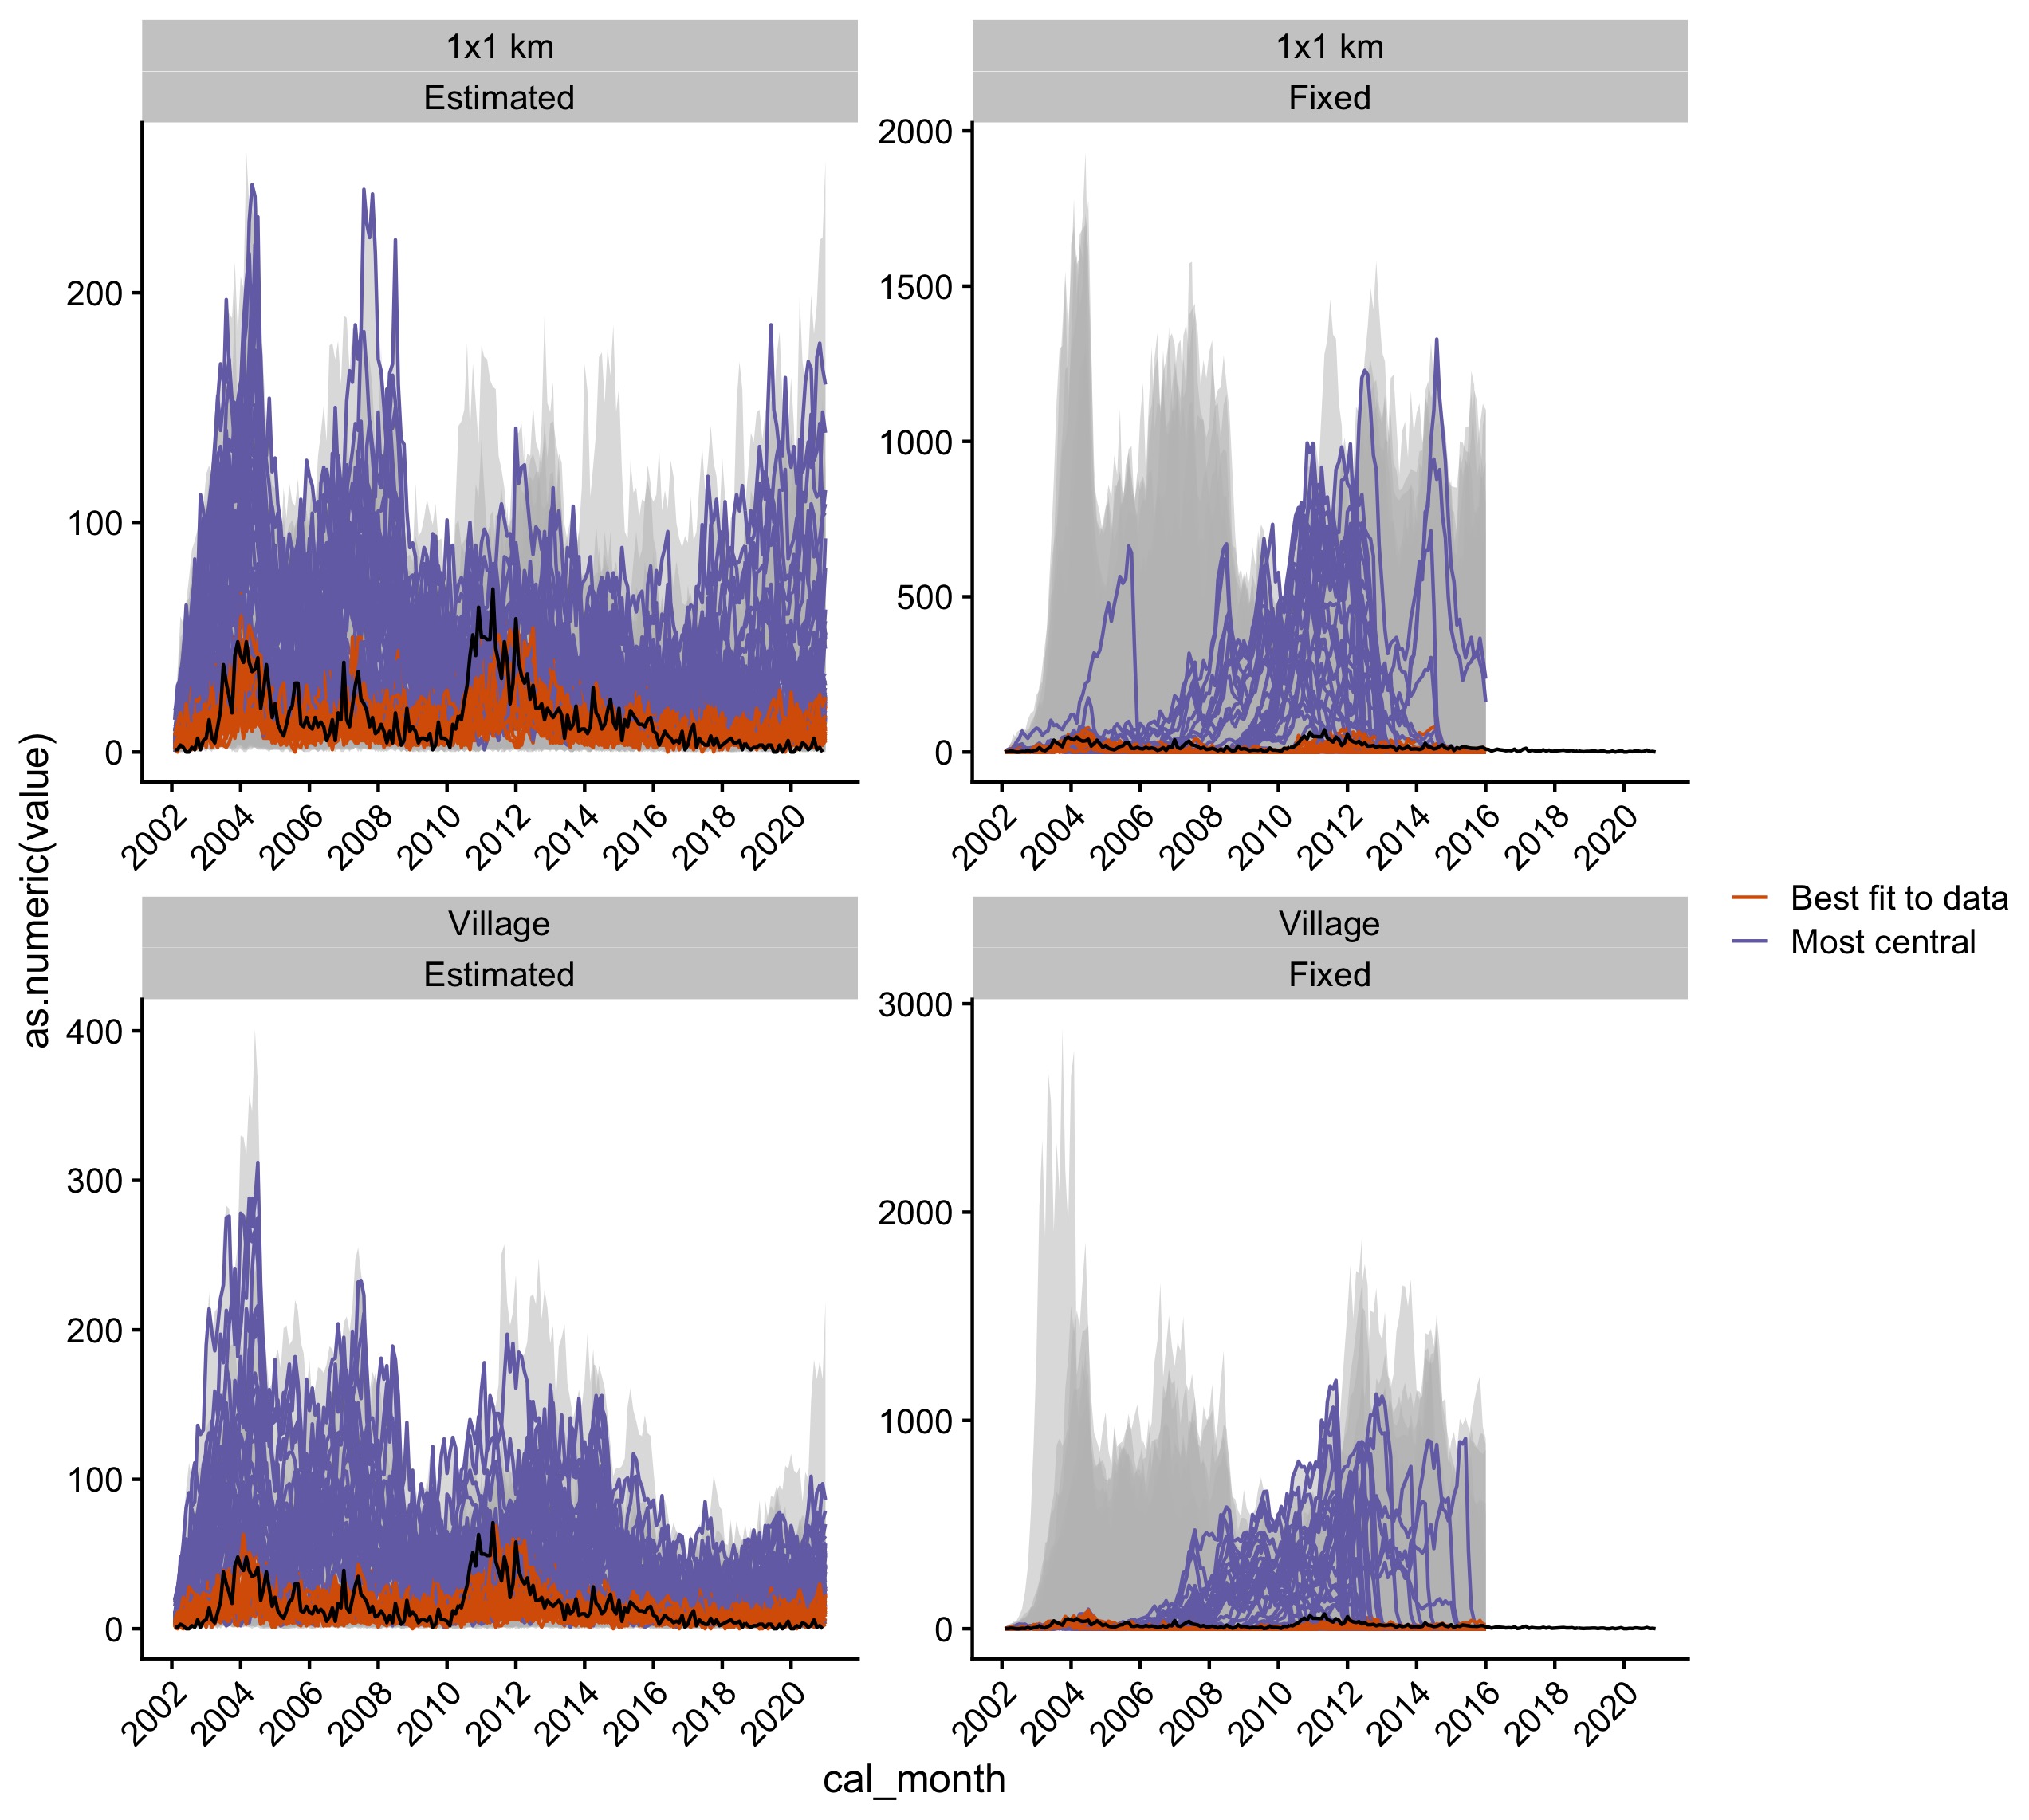 Simulations from the joint posterior estimates for all the models. The grey envelope shows the range of simulations, and the black line is the time series of observed monthly cases. The orange lines show the top five simulations that best fit the data (lowest RMSE) and the purple lines show the top five simulations that have the highest centrality score.